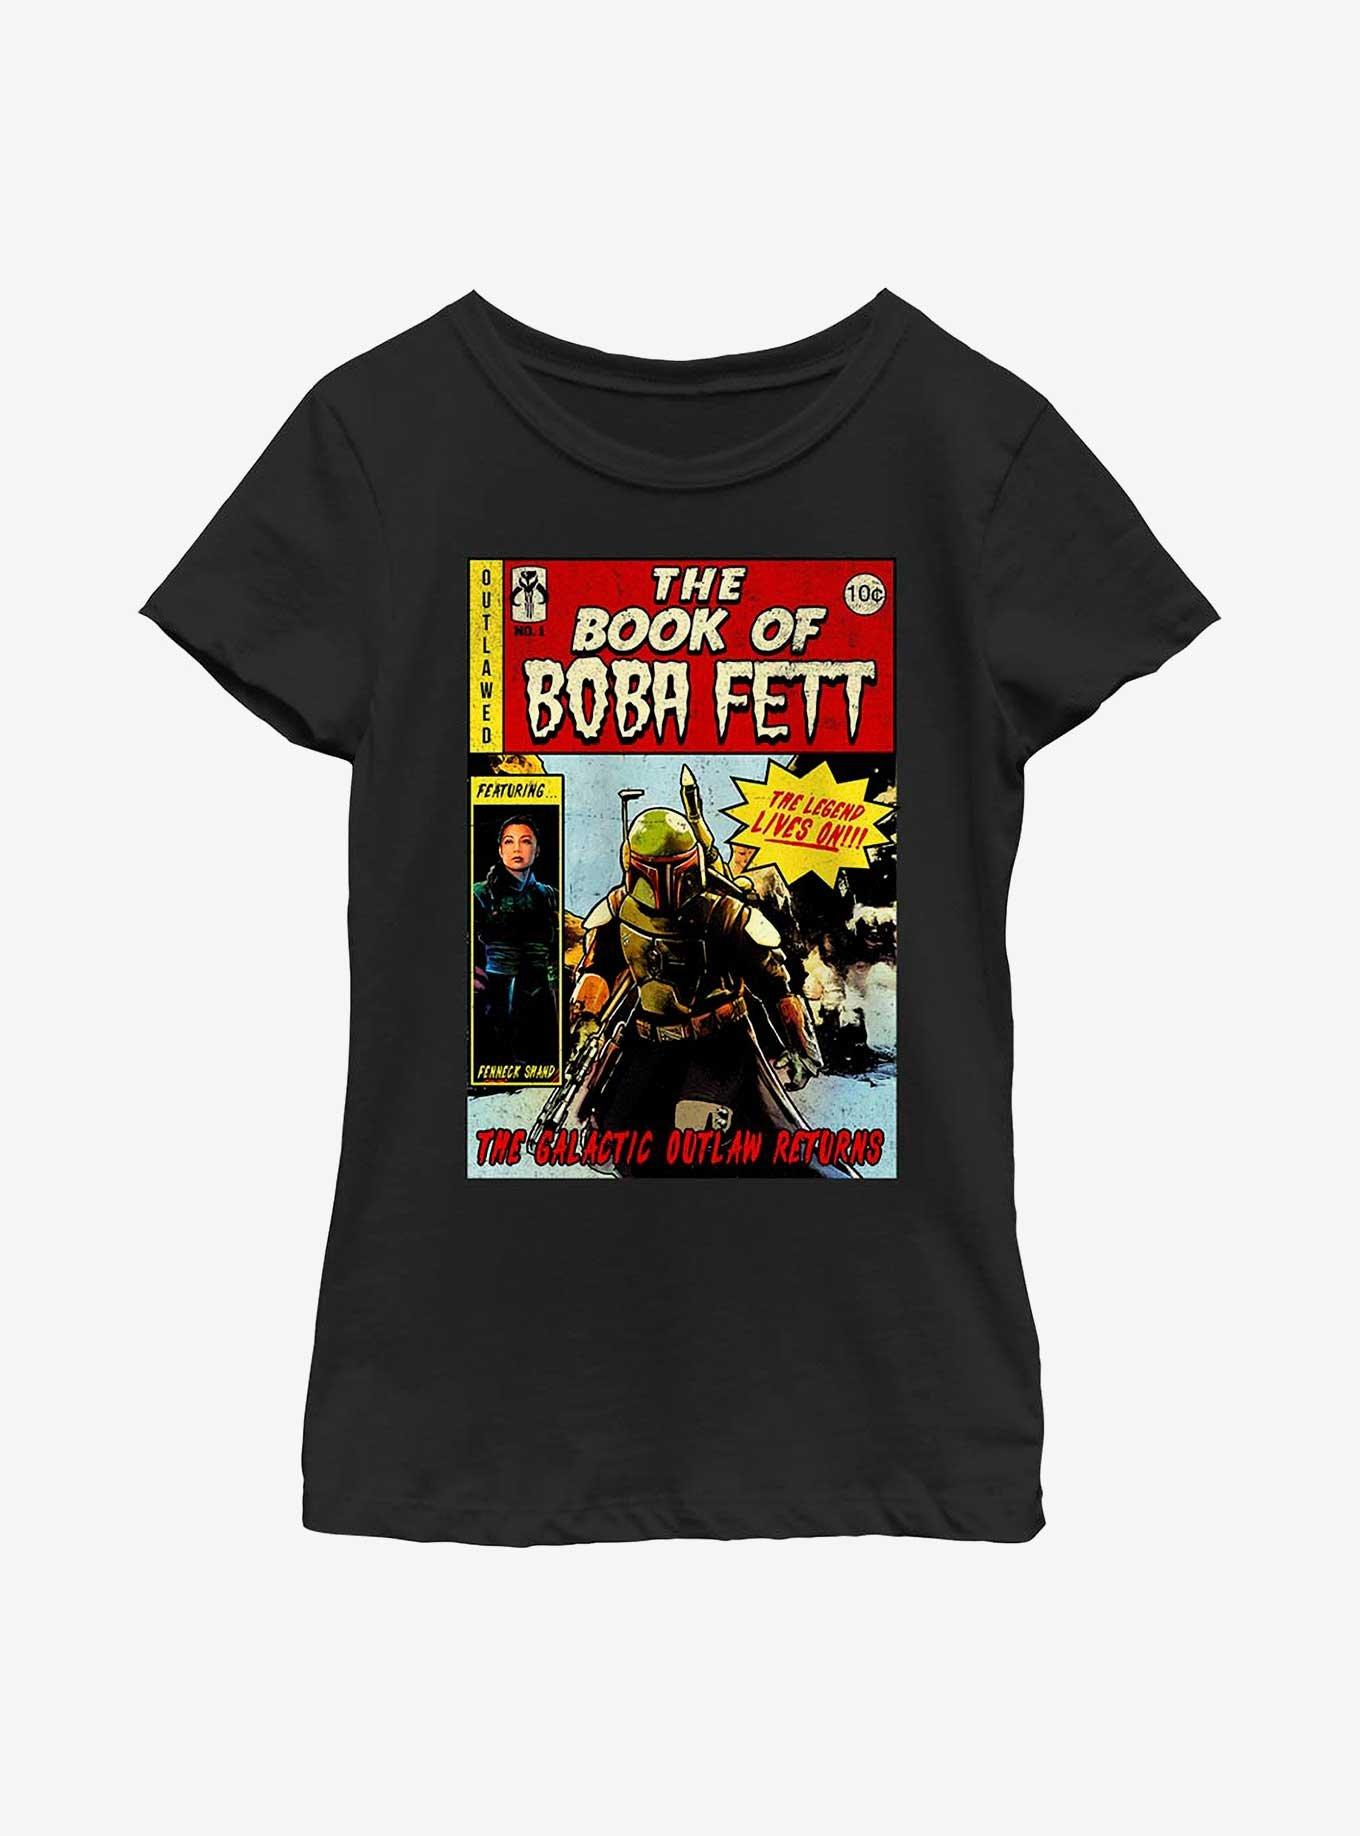 Star Wars: The Book Of Boba Fett Comic Book Cover Youth Girls T-Shirt, BLACK, hi-res